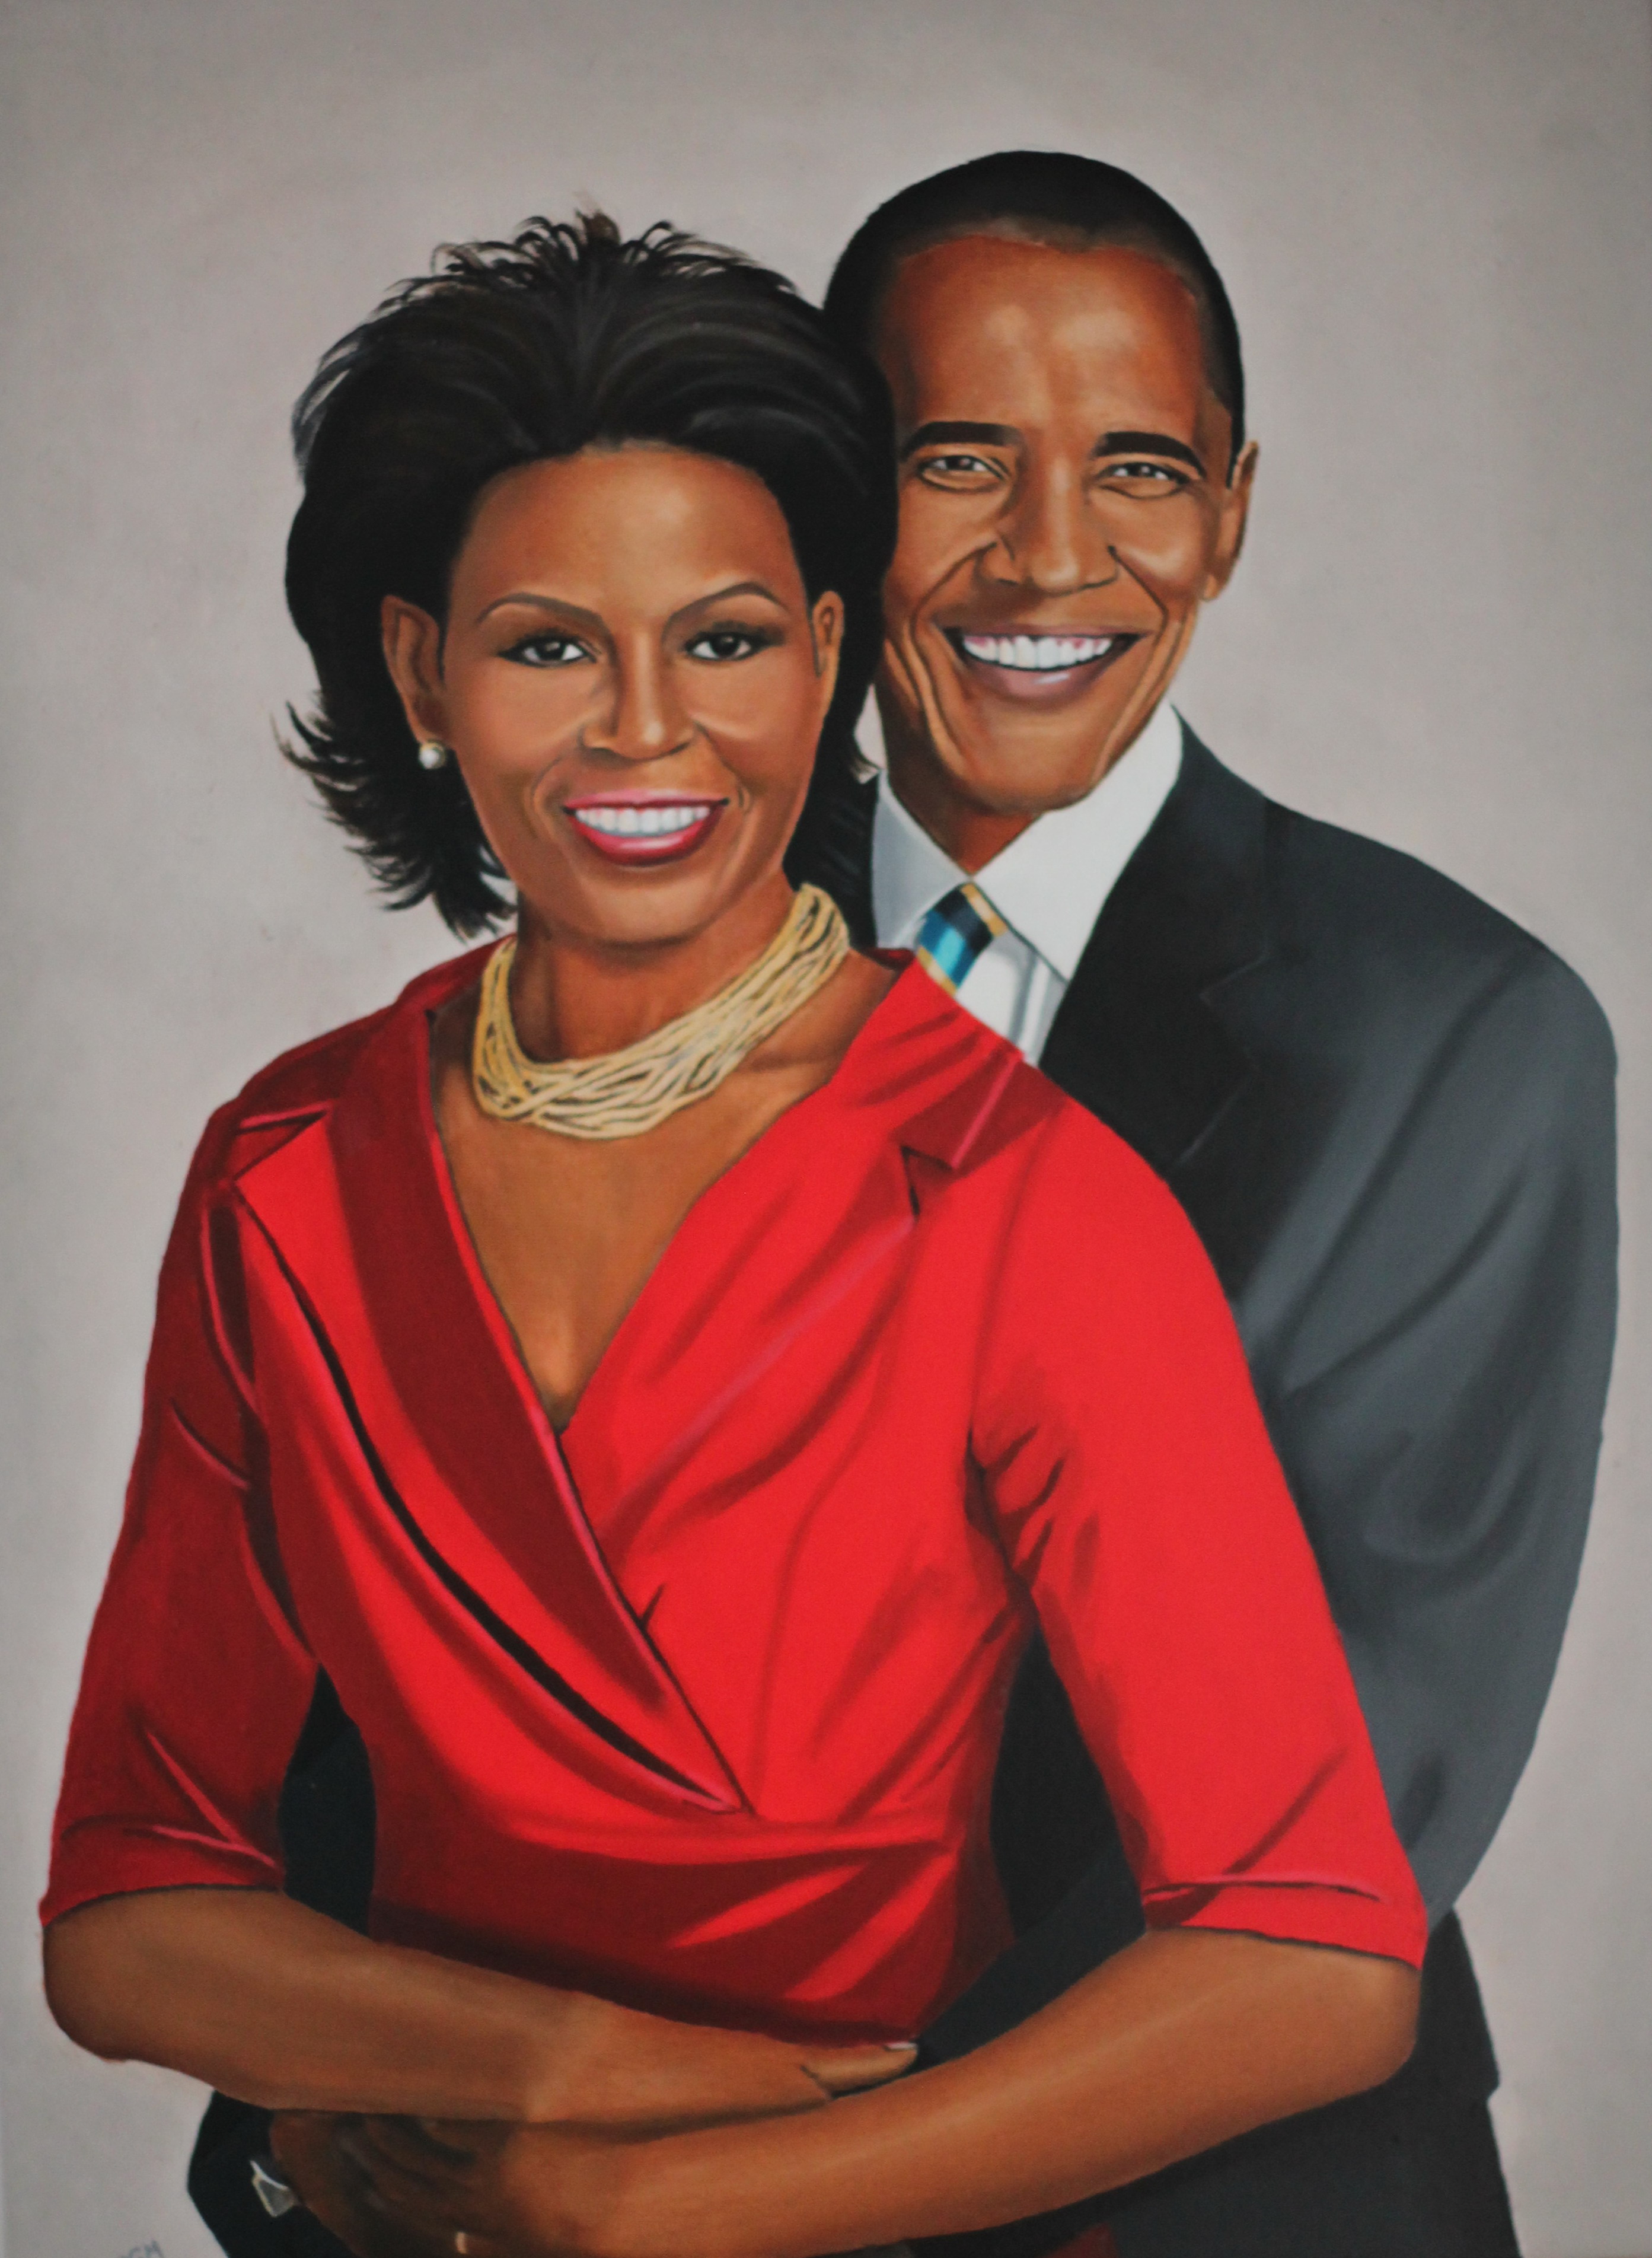 The President and First Lady